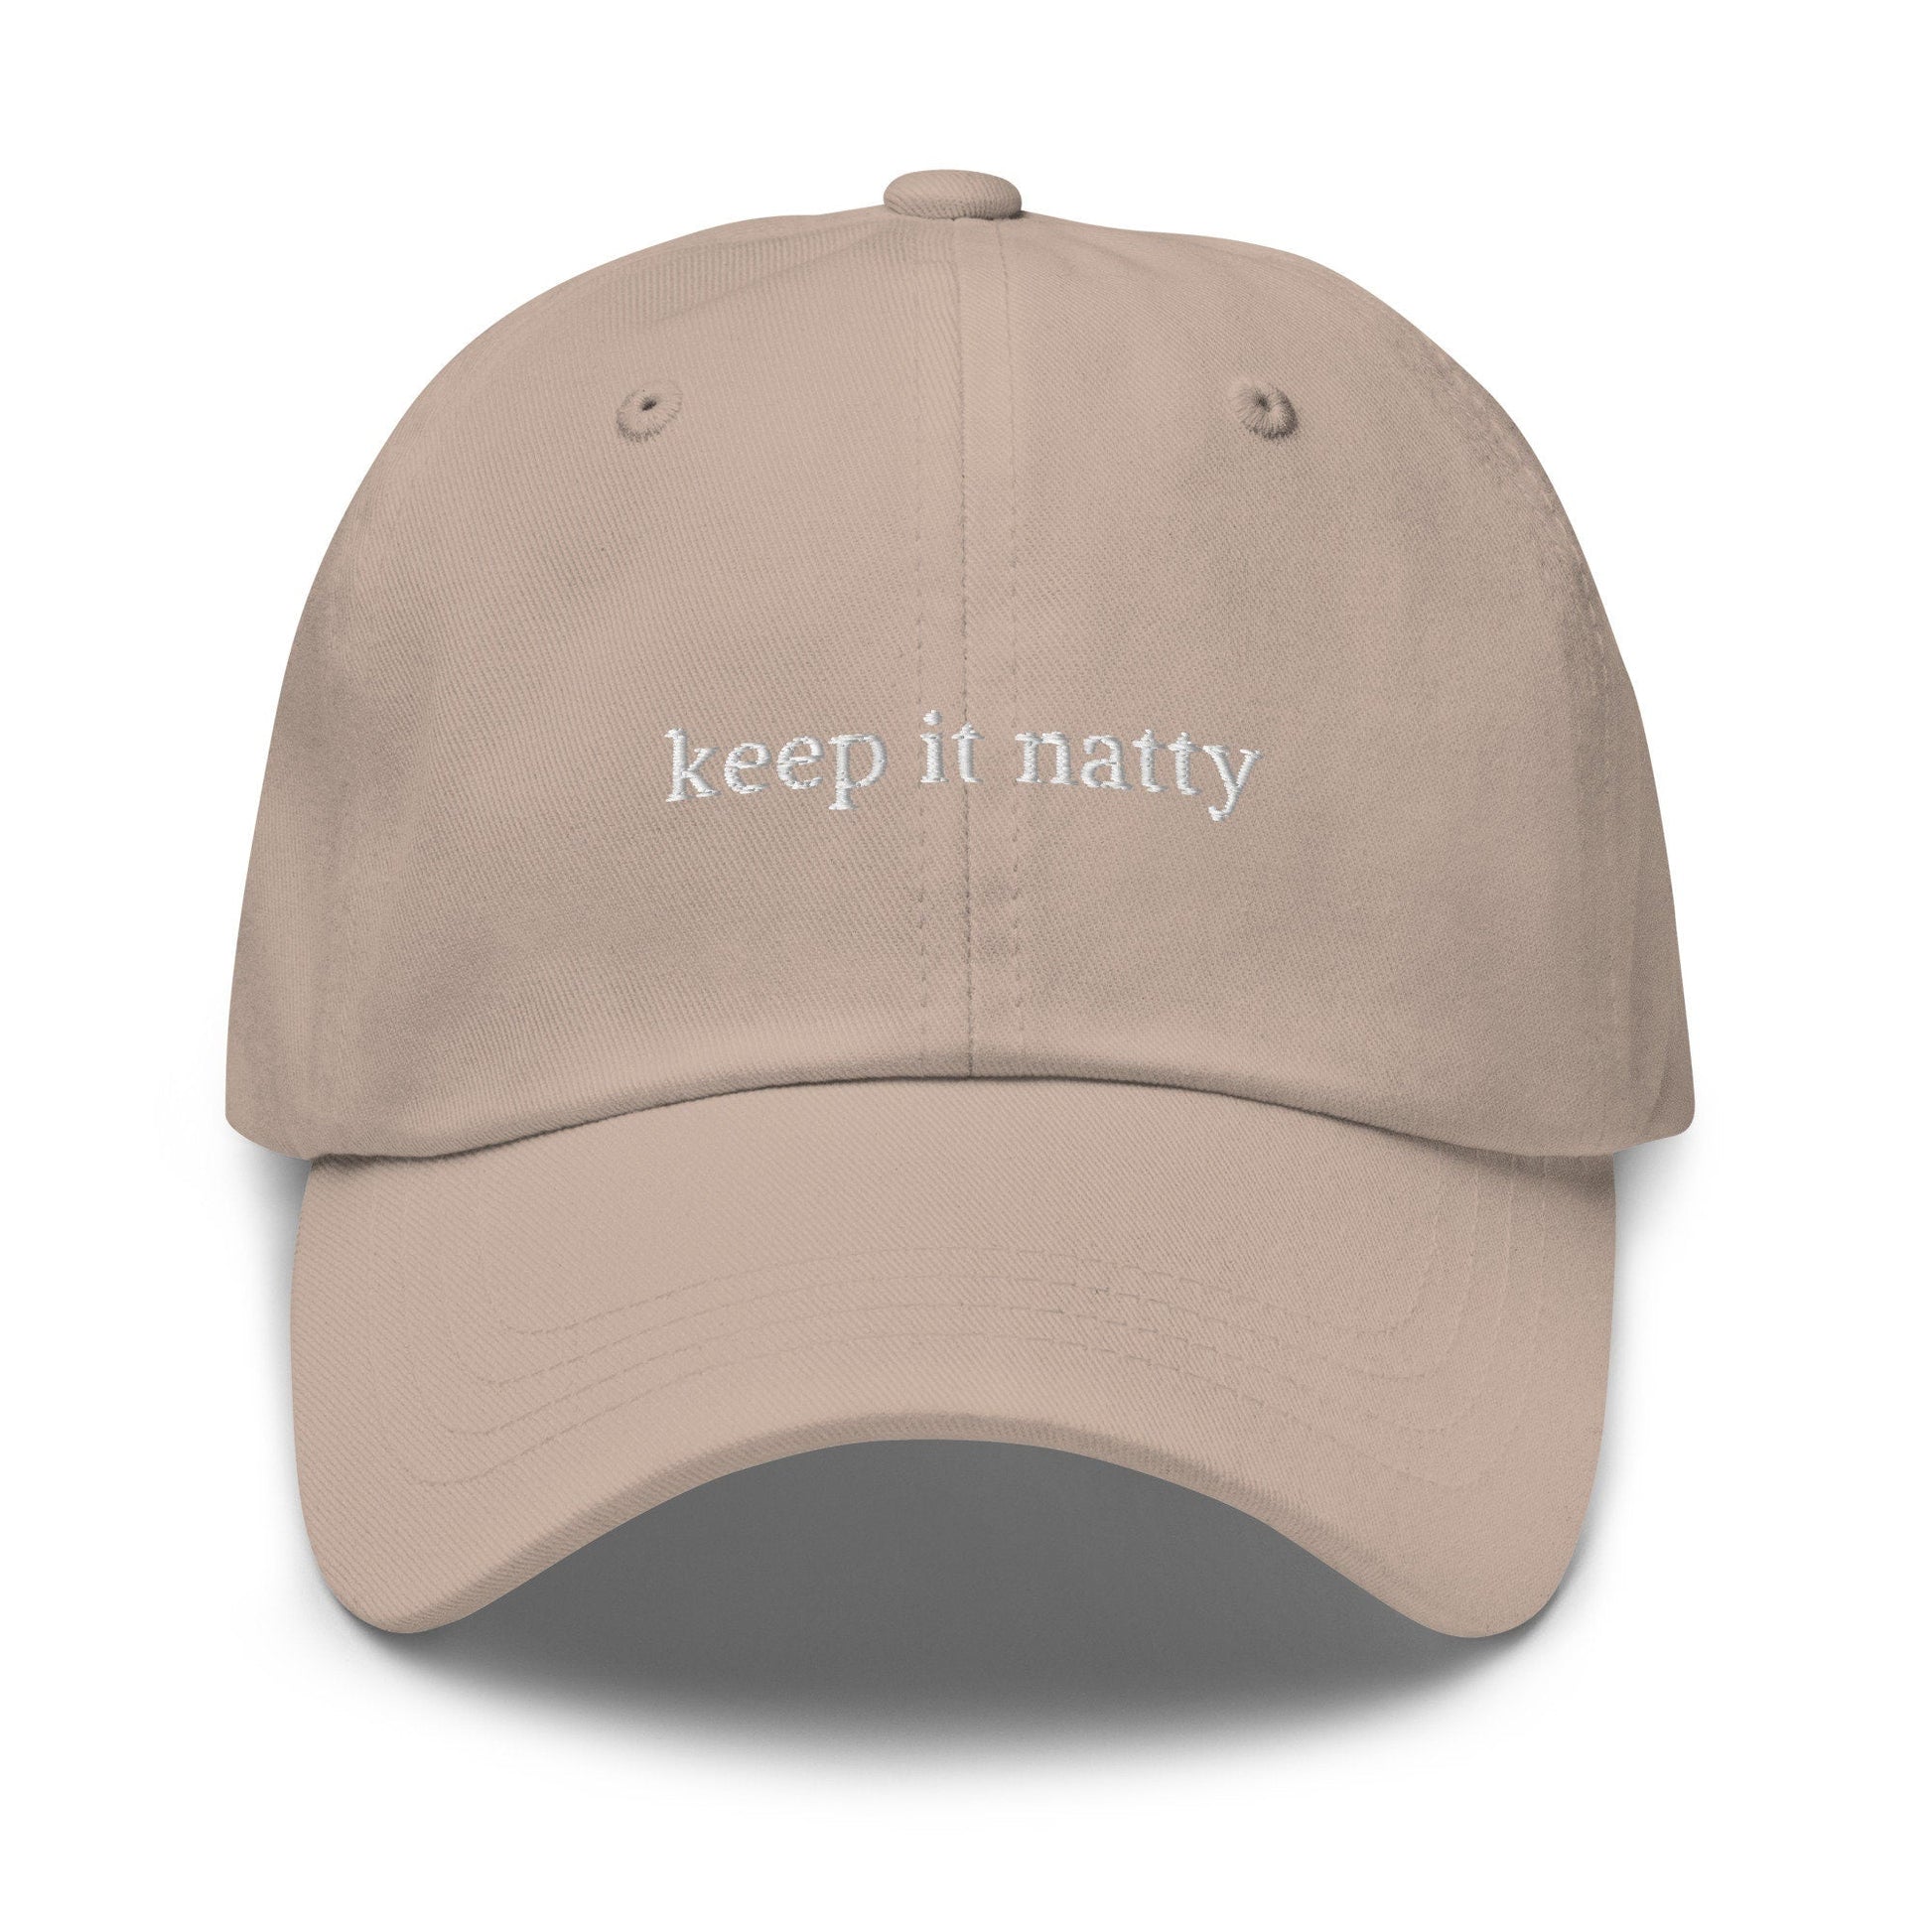 Natural Wine Hat - Keep it Natty - Handmade Embroidered Cotton Cap